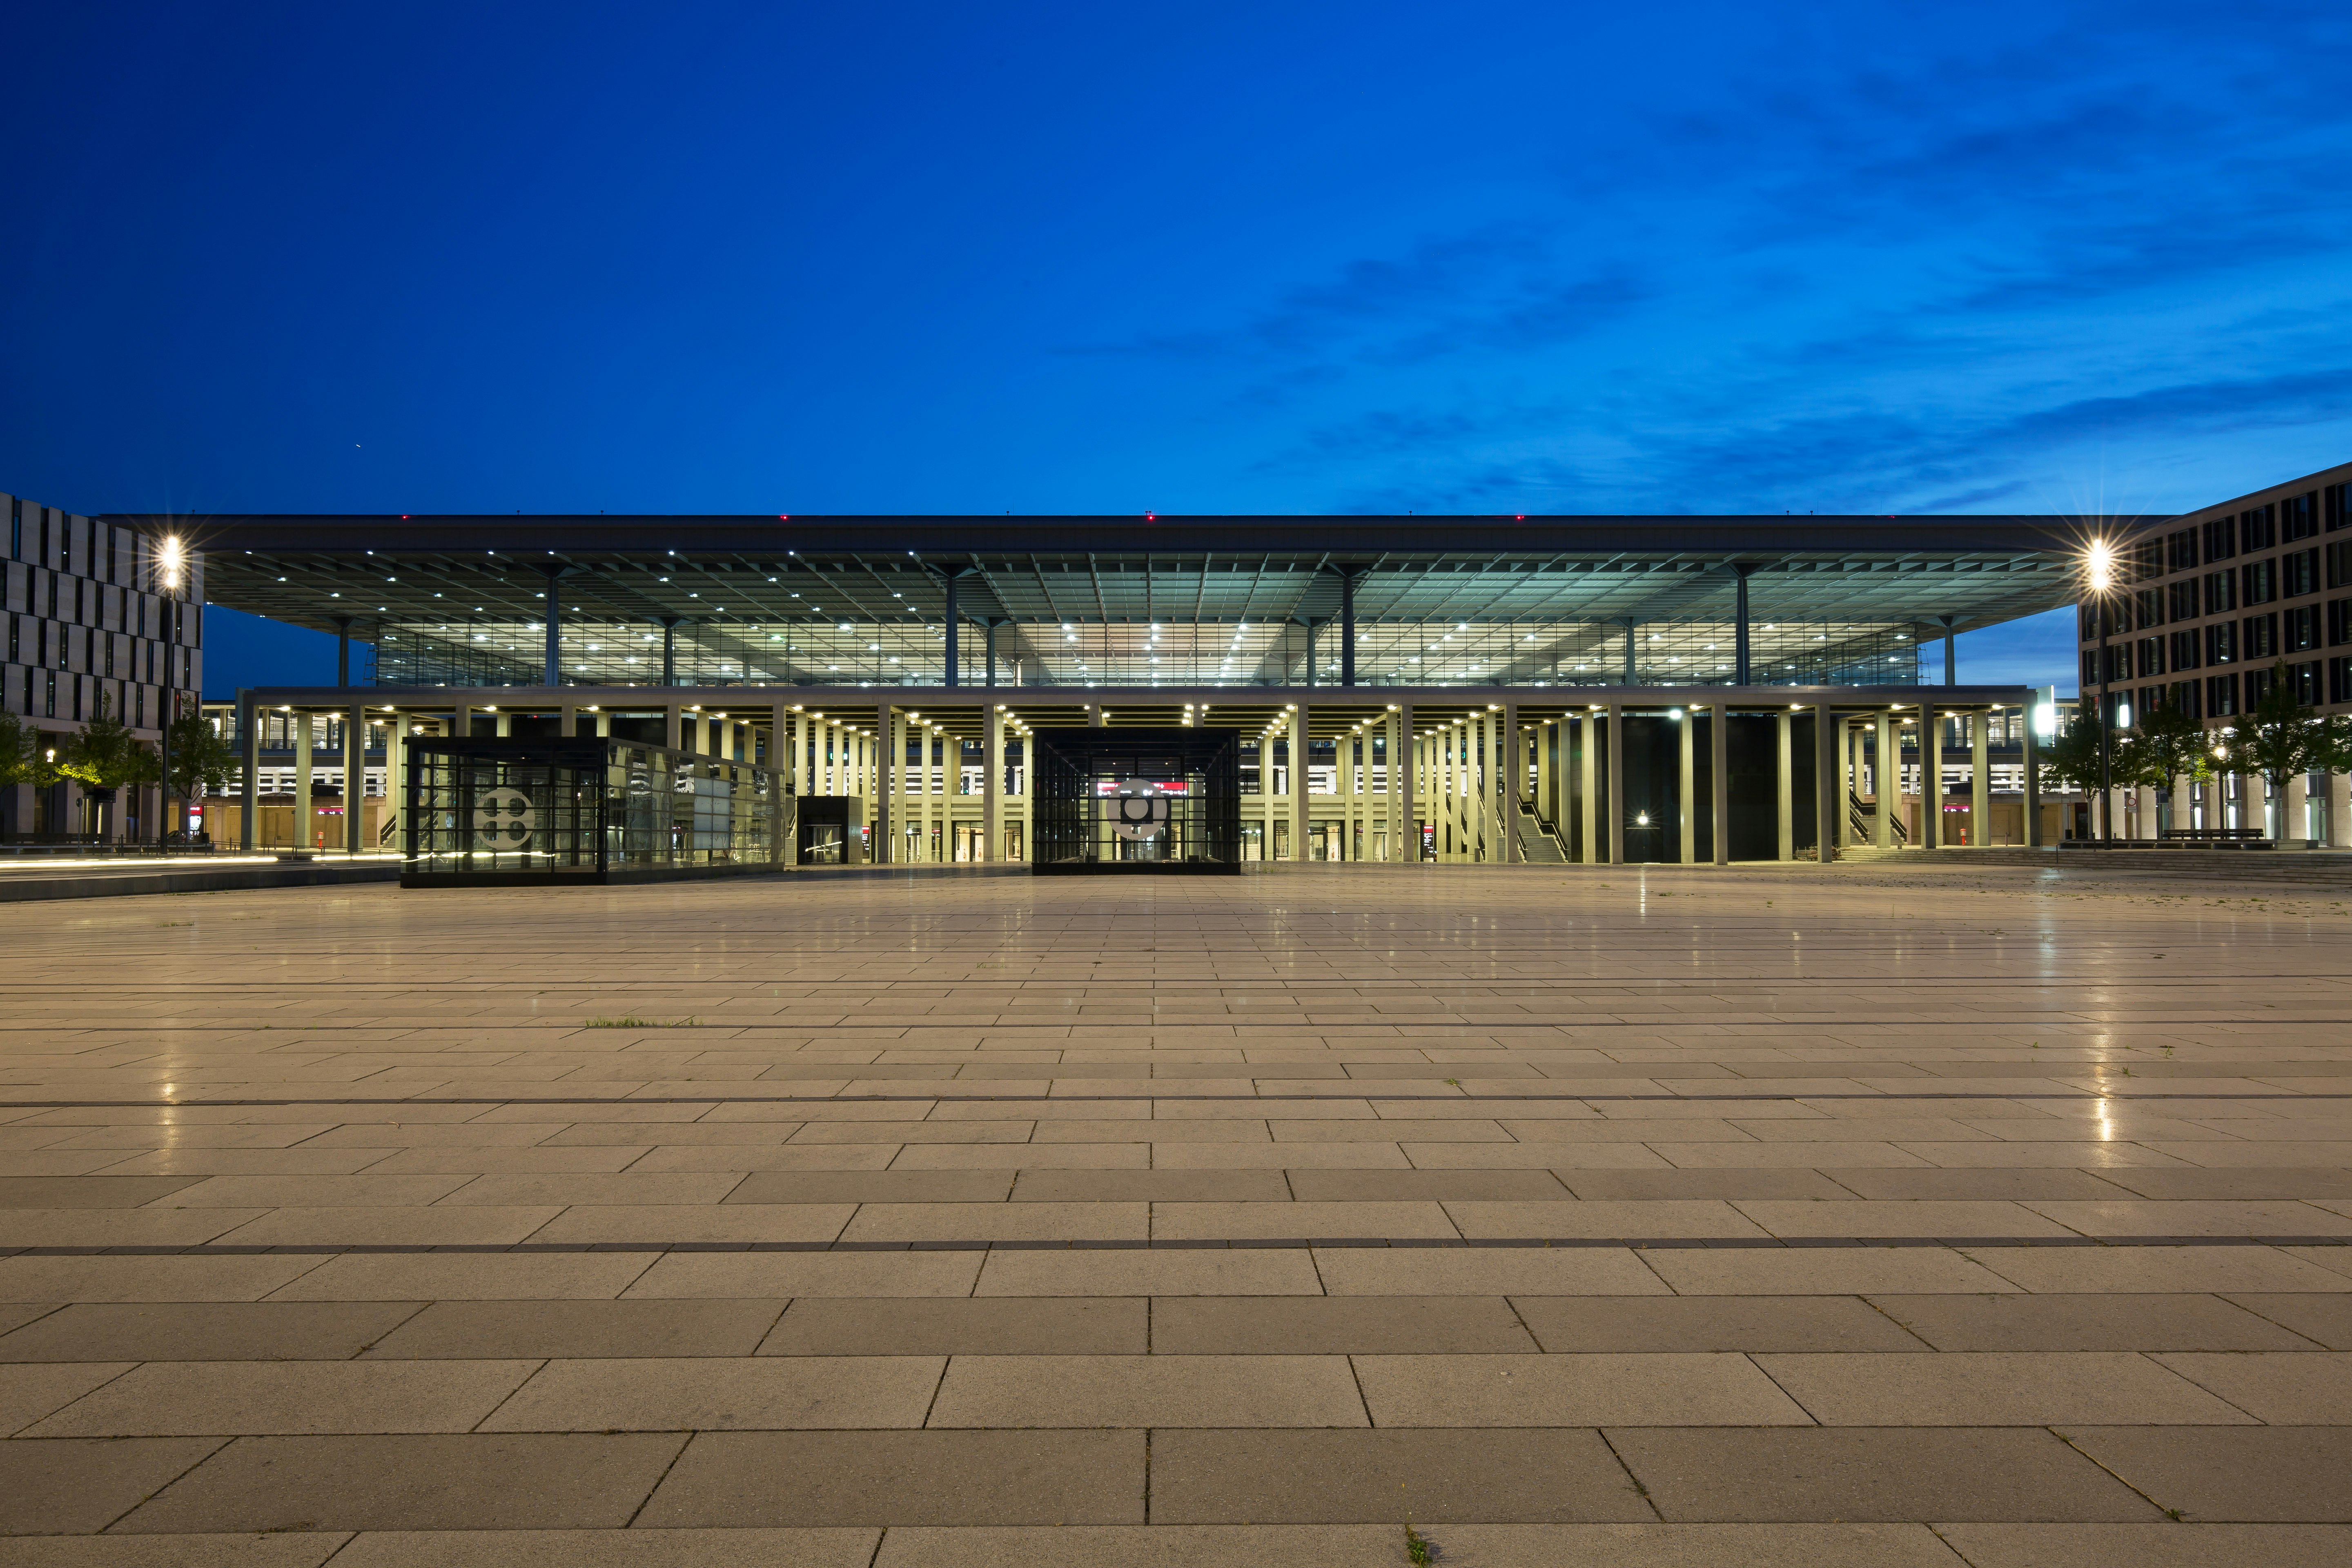 he terminal of Berlin Brandenburg Airport 'Willy Brandt'. It is the international commercial airport, located on the southern outskirts of Berlin in Schönefeld.